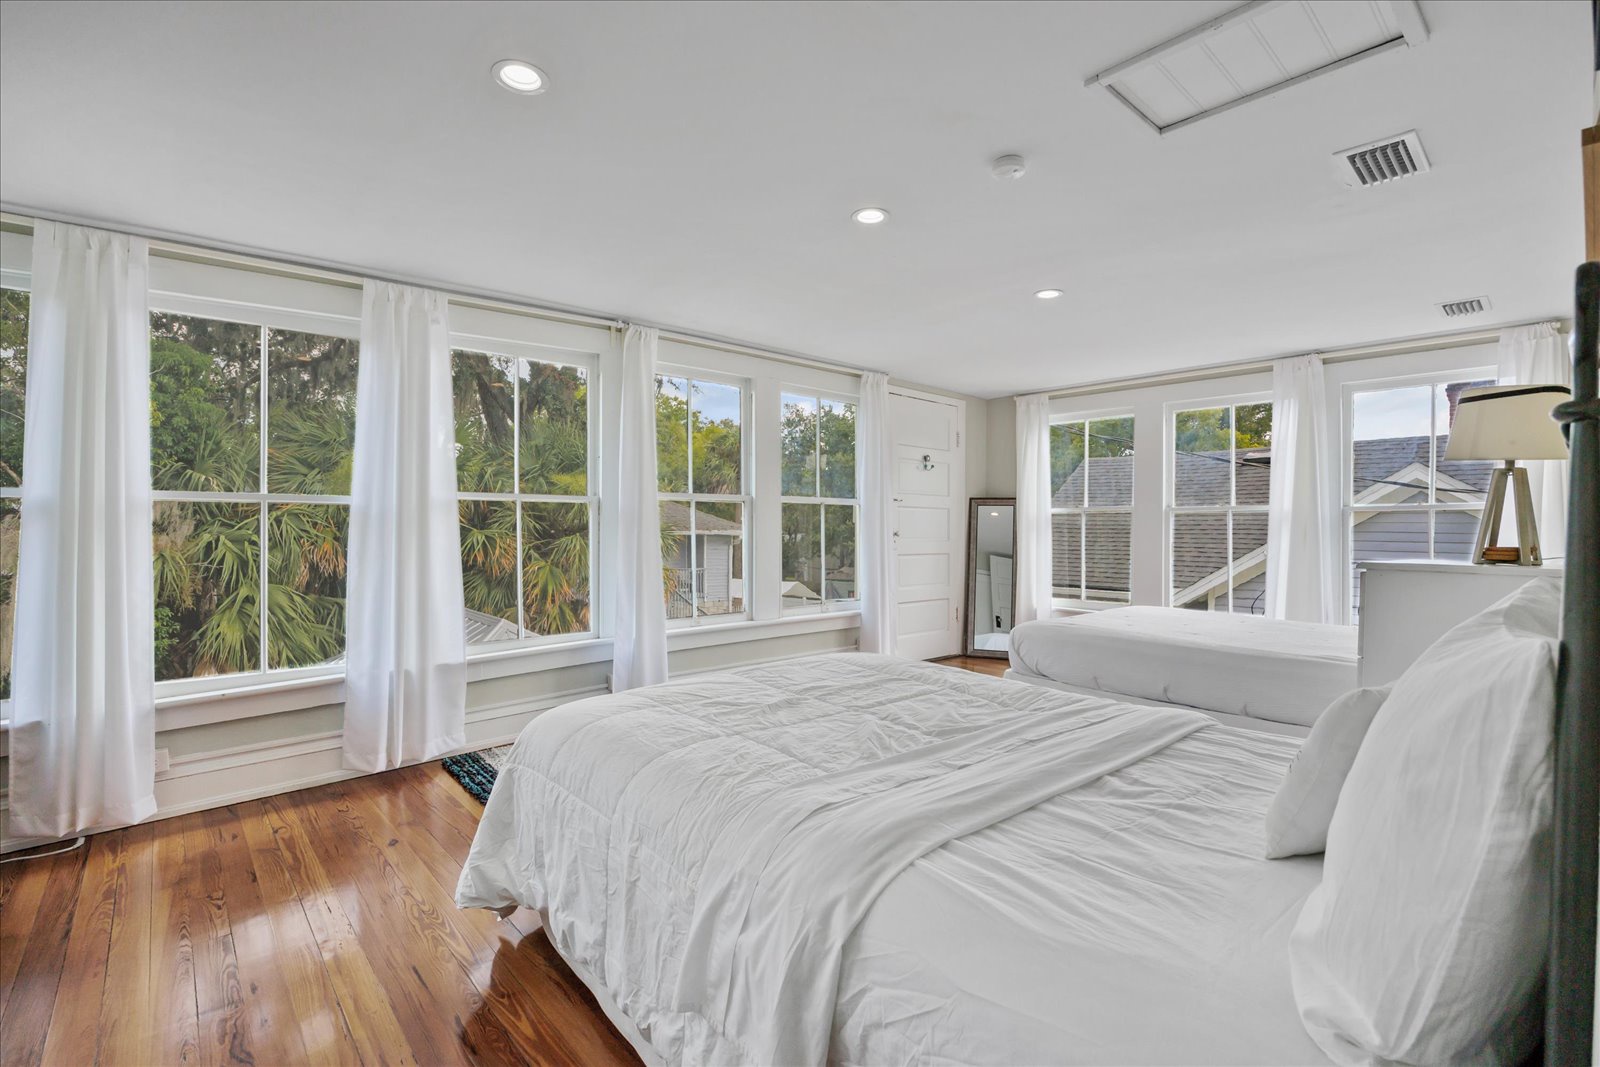 The larger bedroom includes two full-sized beds & serene sitting area